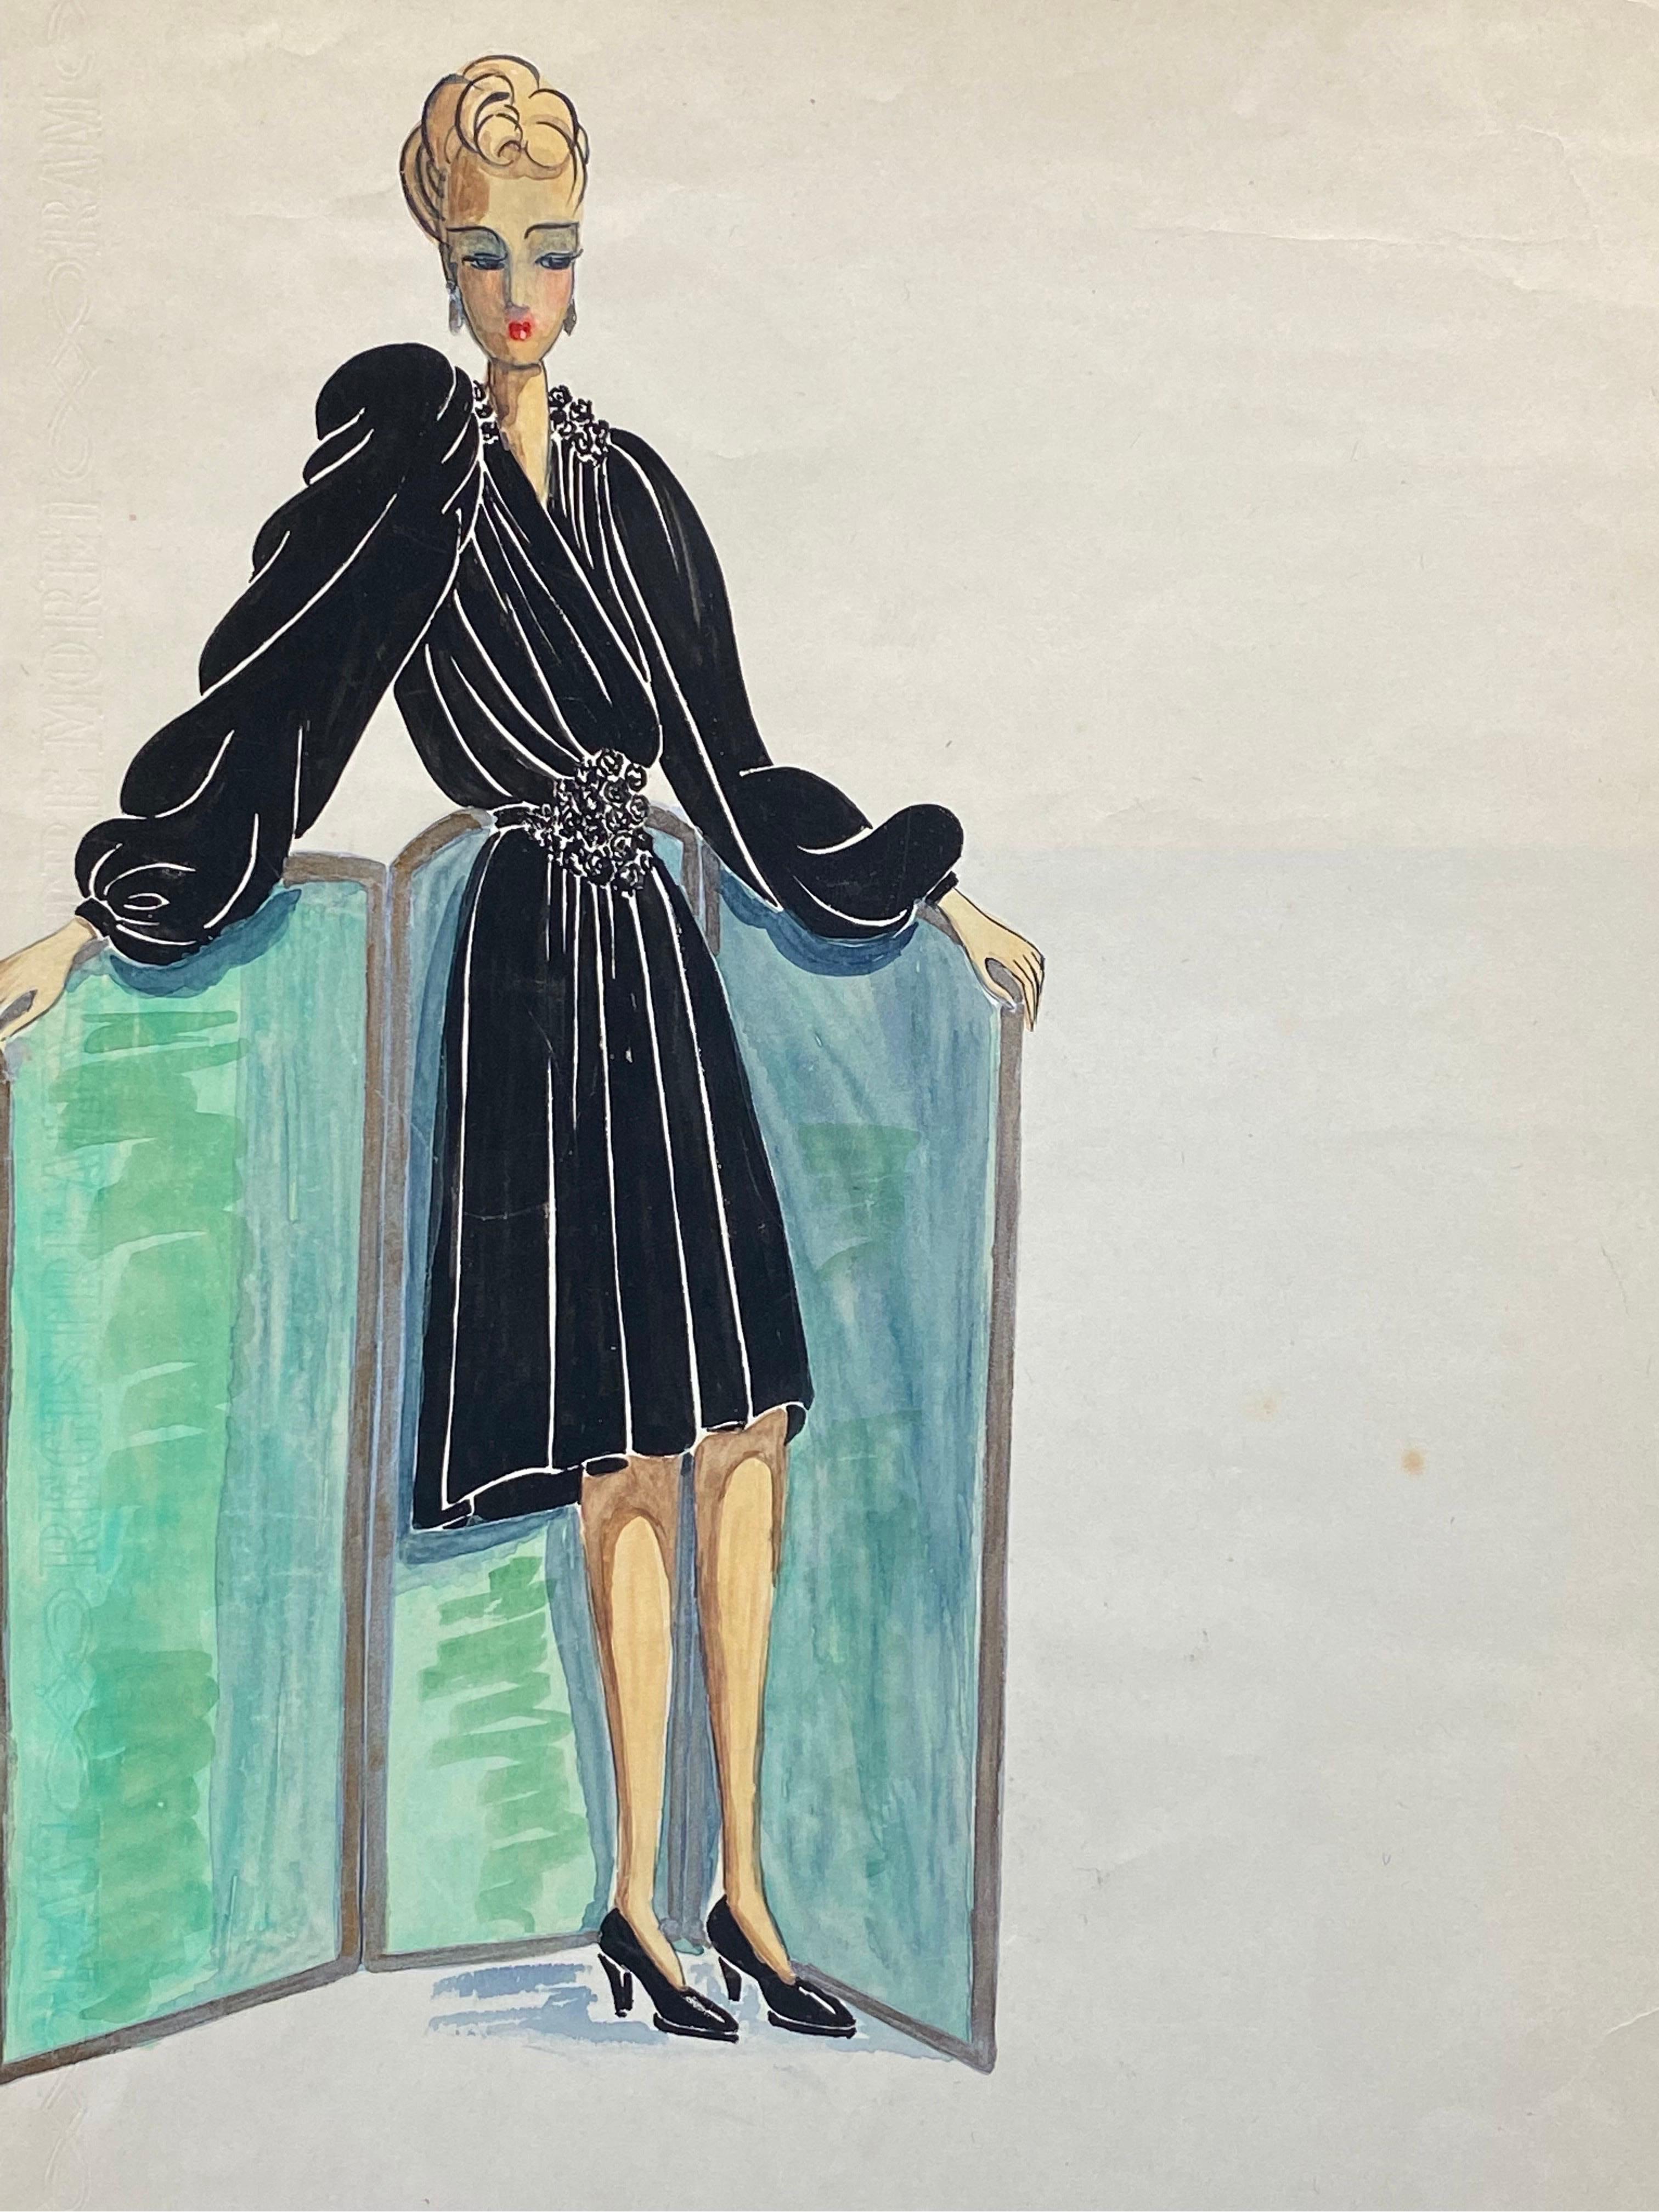 1940's Fashion Illustration - Chanel Styled Woman In Chic Black Dress